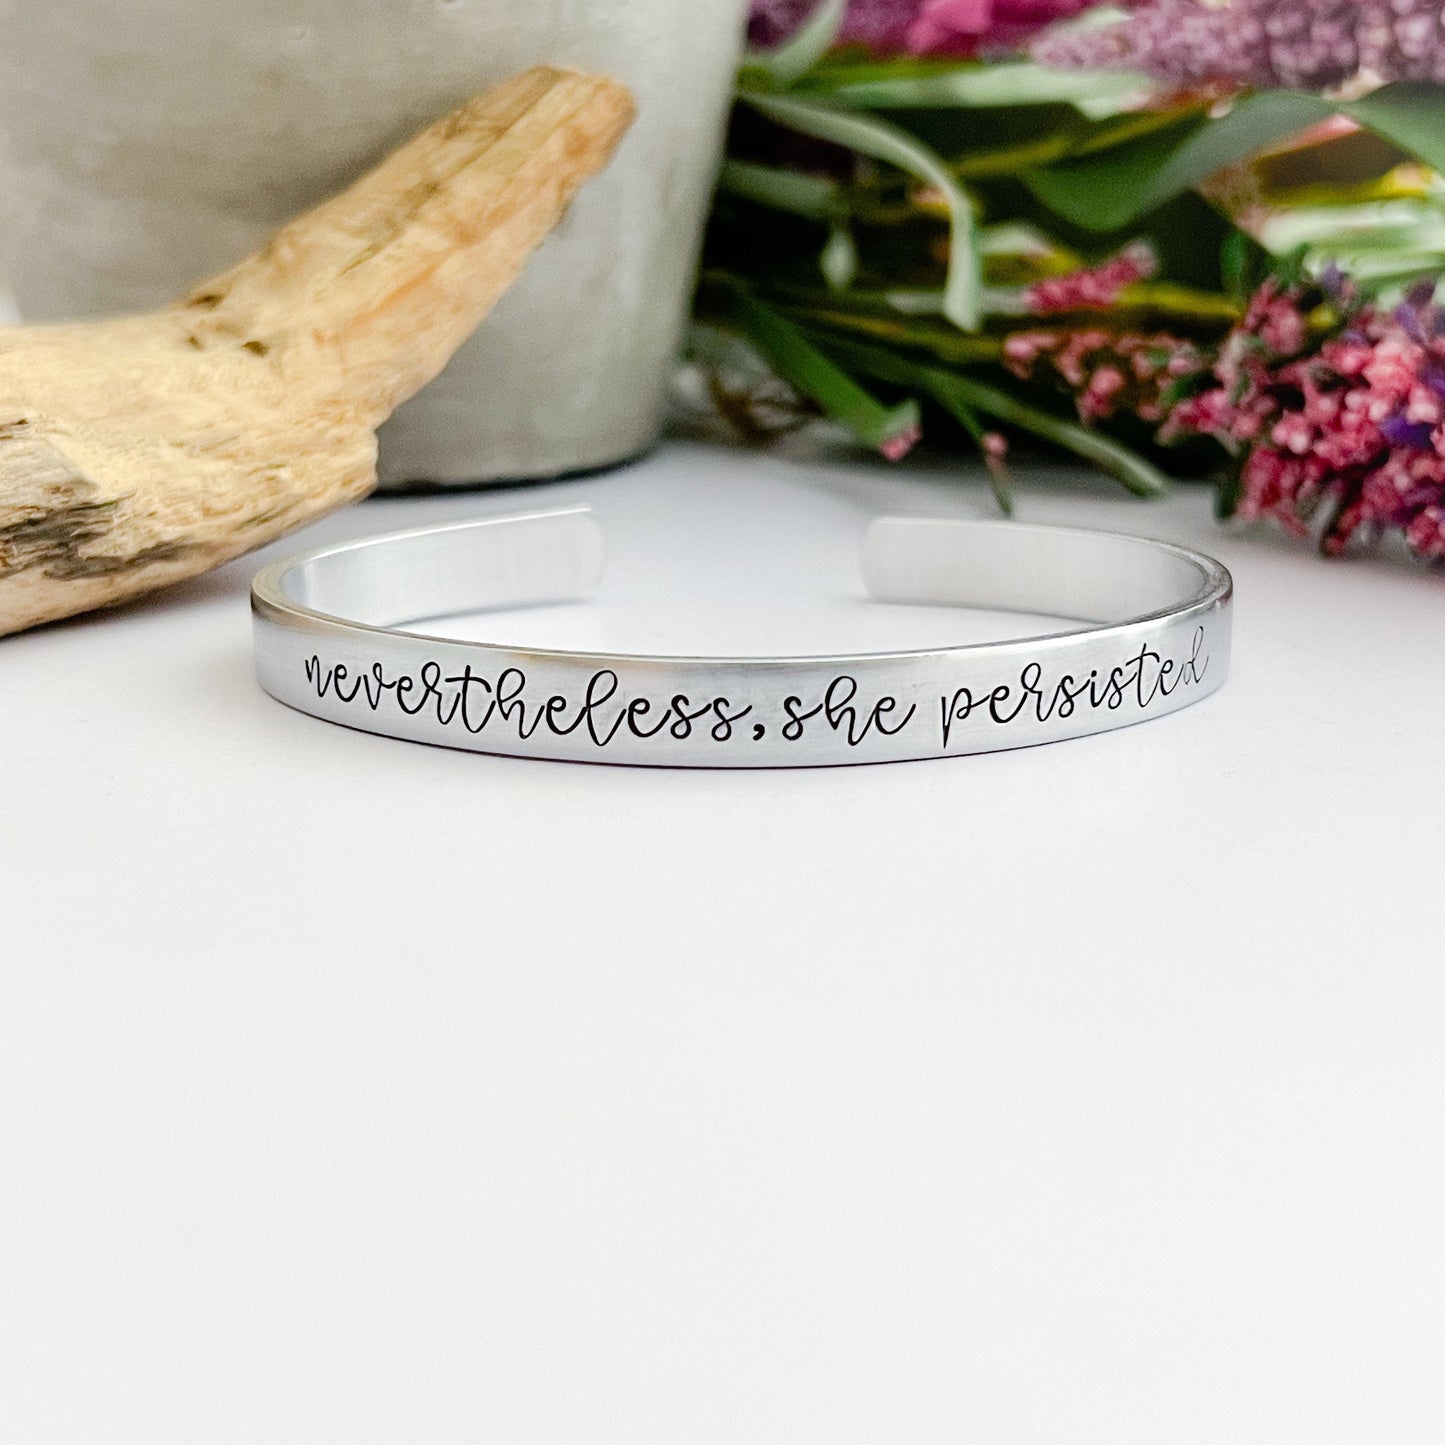 NEVERTHELESS, she persisted--hand stamped skinny silver mantra cuff bracelet-strong woman-motivational jewelry-friend gift-christmas gift